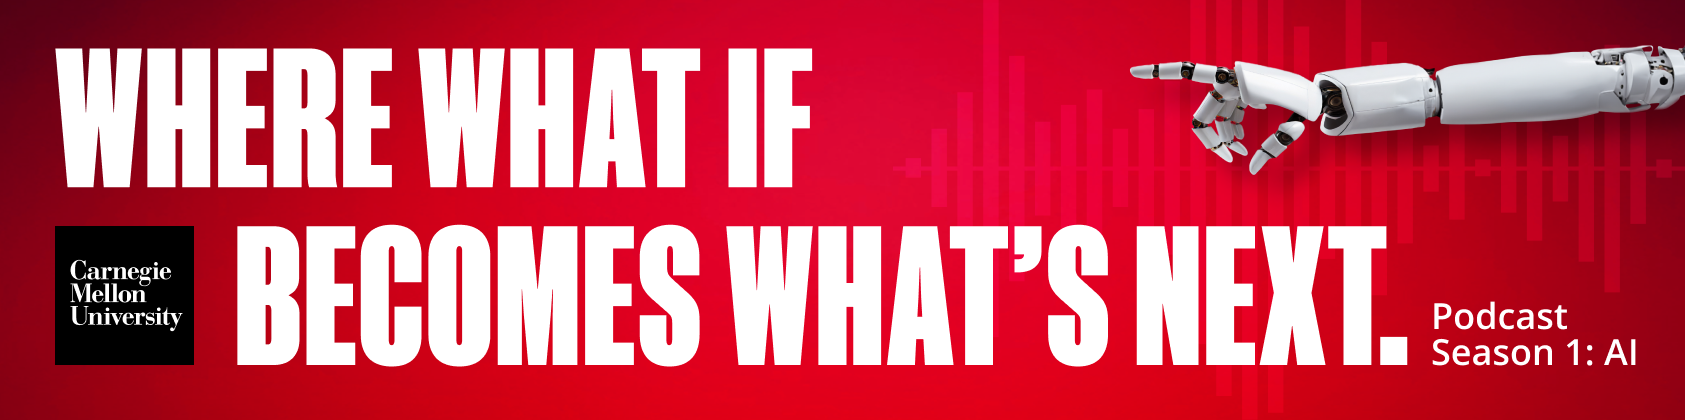 Where What If Becomes What's Next: Carnegie Mellon University's podcast, season one: AI